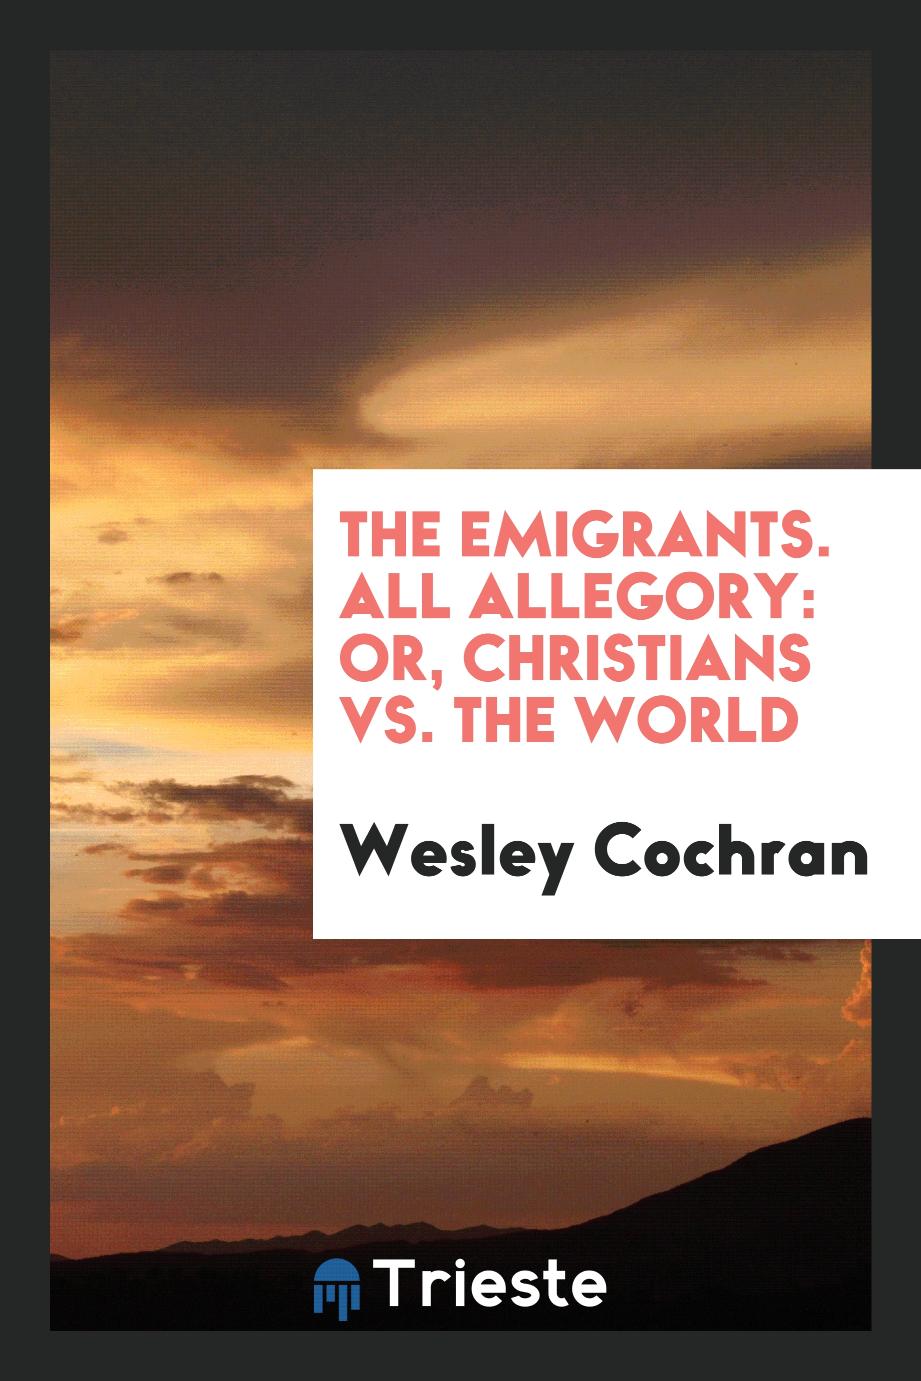 The emigrants. All allegory: or, Christians vs. the world